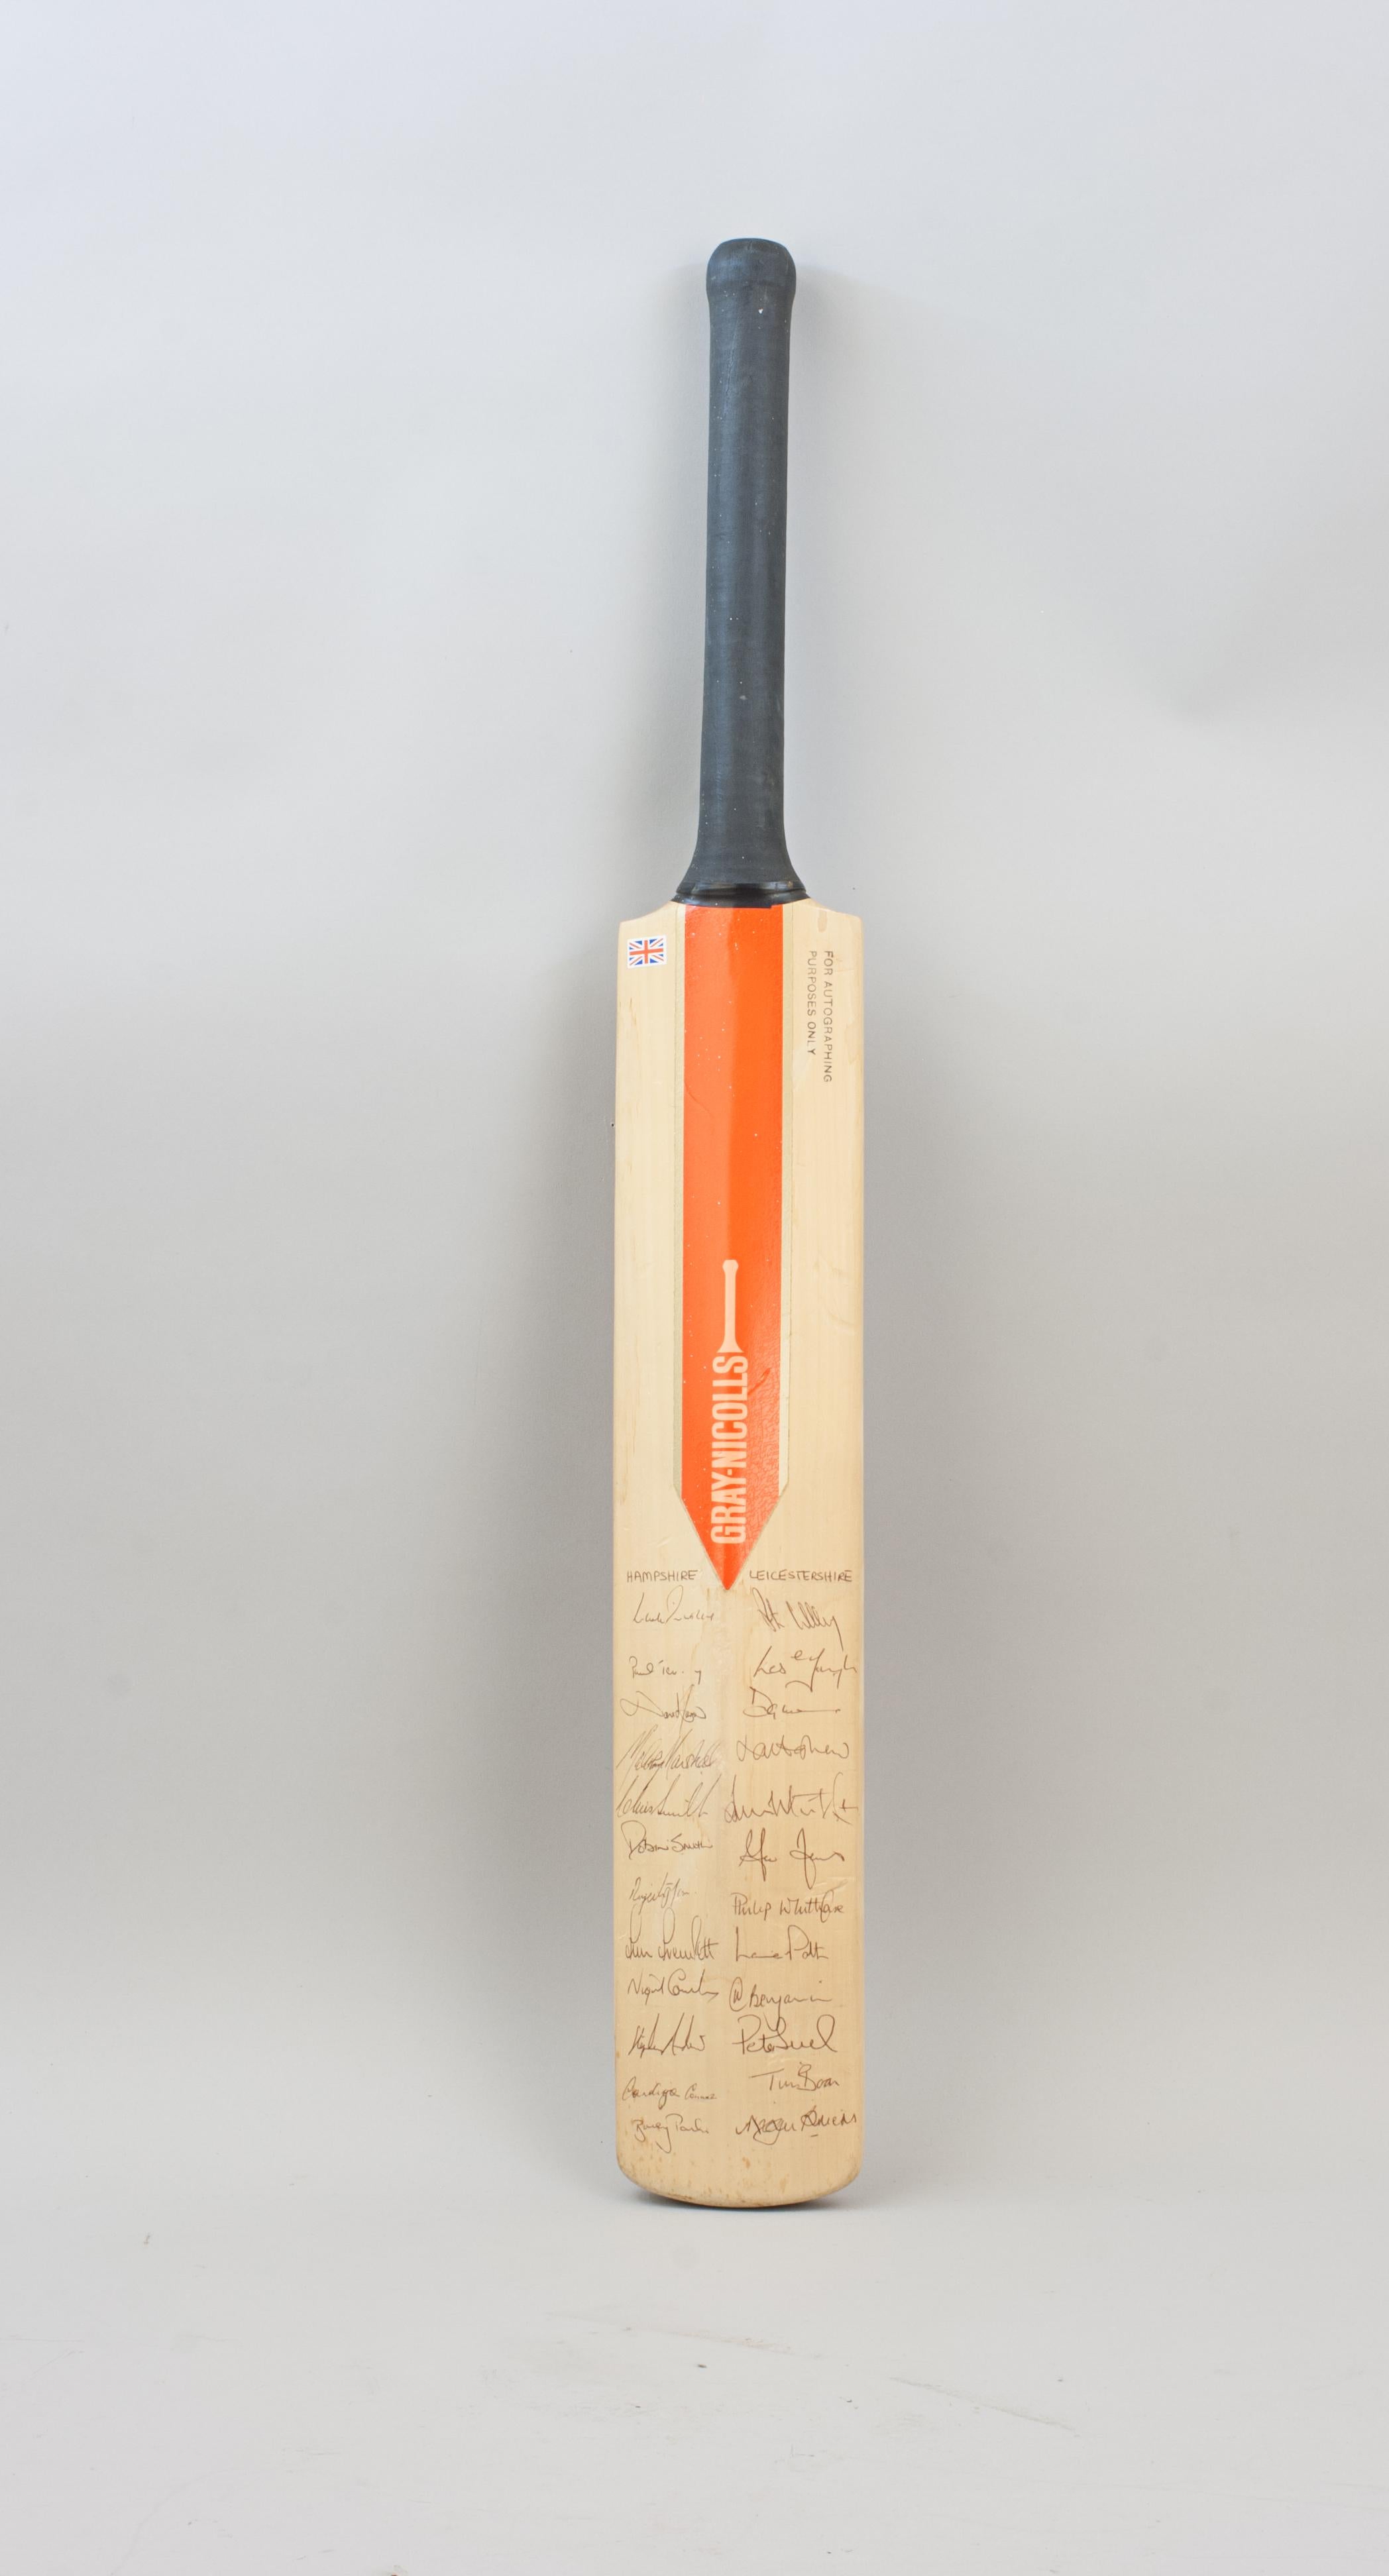 Autographed Cricket Bat, Chris Tavaré Benefit Year' 88.
A Gray-Nicolls 'For Autographing Purposes Only' cricket bat with signatures from Kent, Middlesex, Hampshire & Leicestershire for Kent's Chris Tavaré Benefit Match, 1988. The willow cricket bat